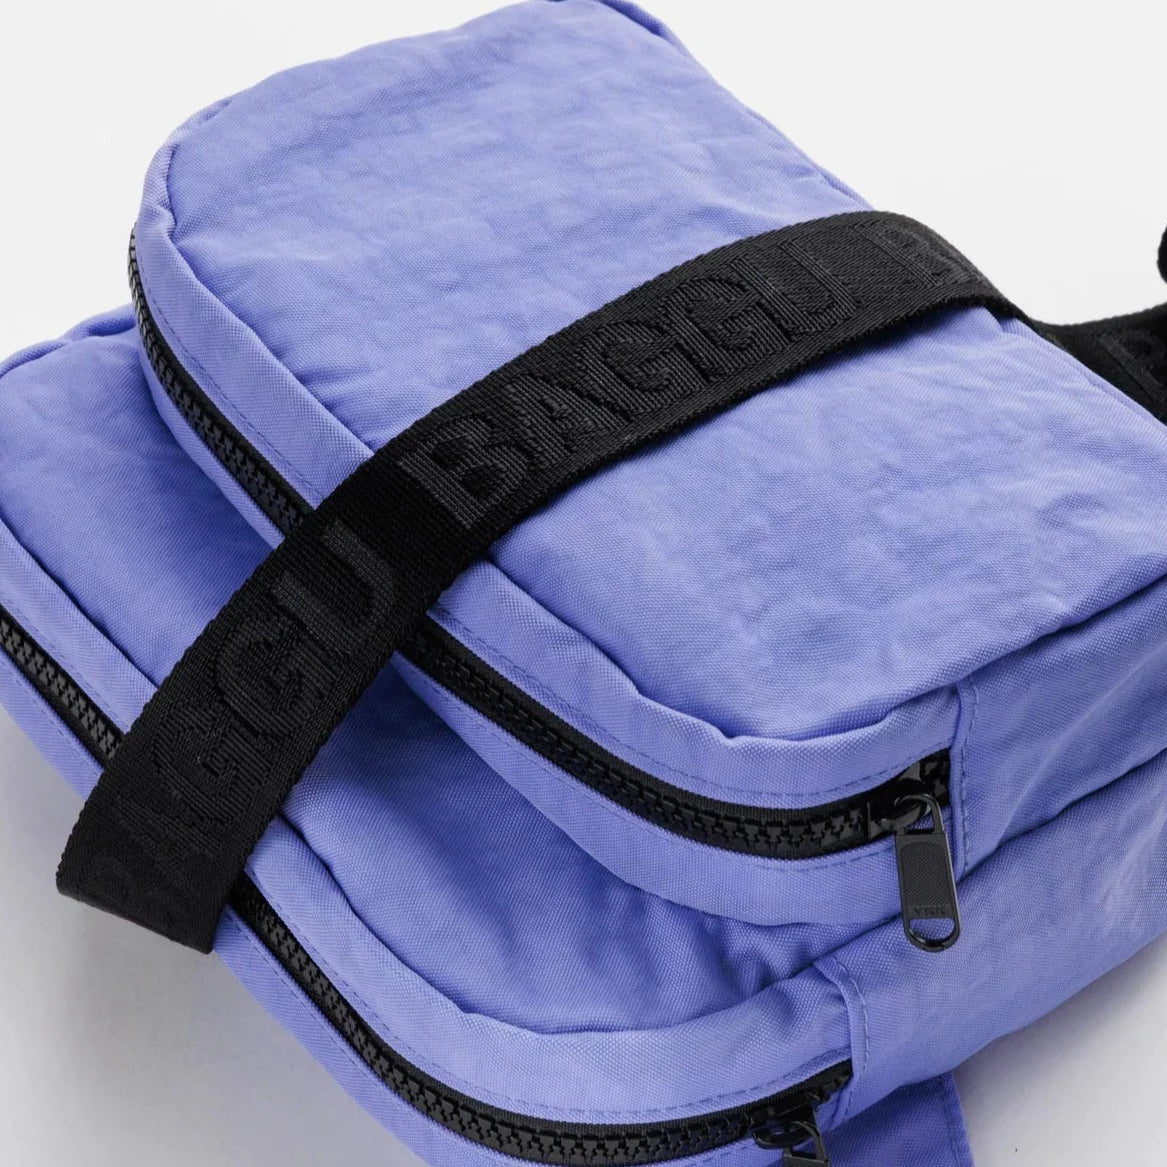 Blue Fanny Pack with Black Zippers and Black Strap with De-bossed Strap with "BAGGU" Text